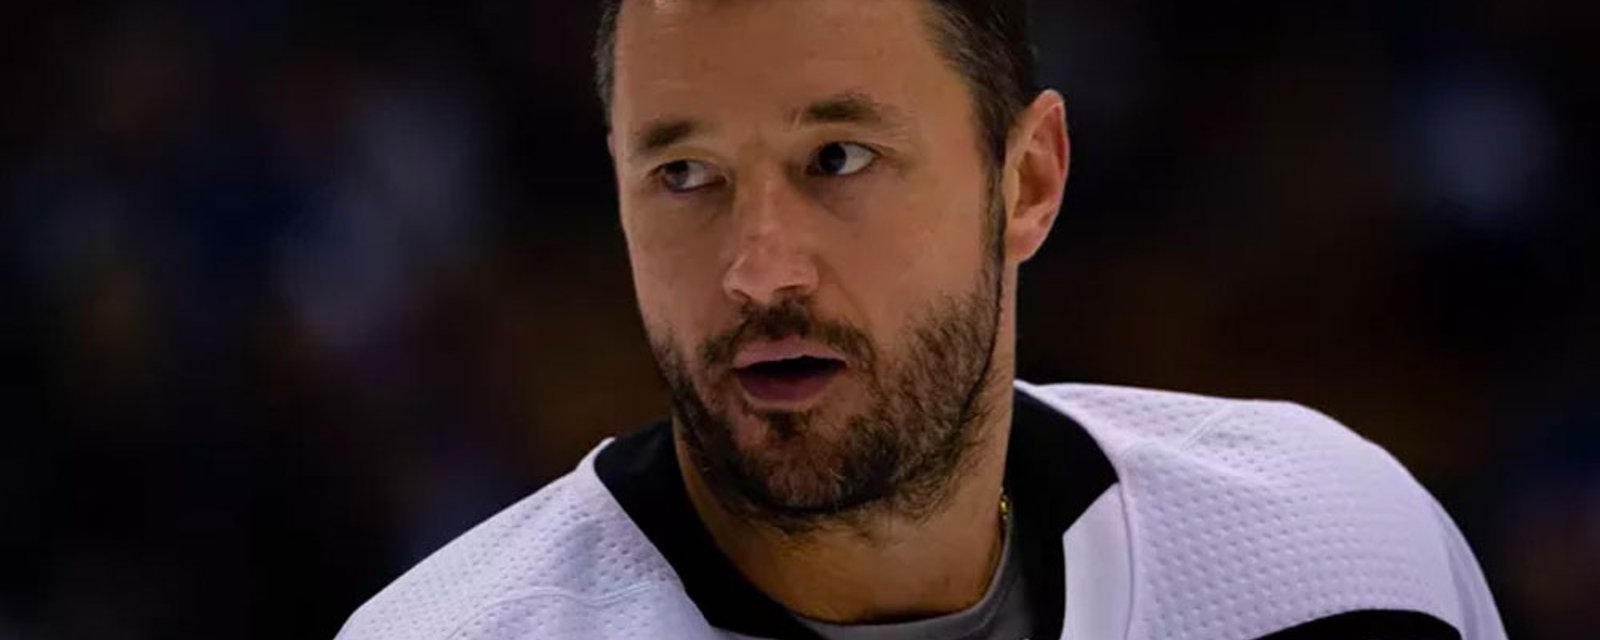 Kovalchuk is staying in the NHL